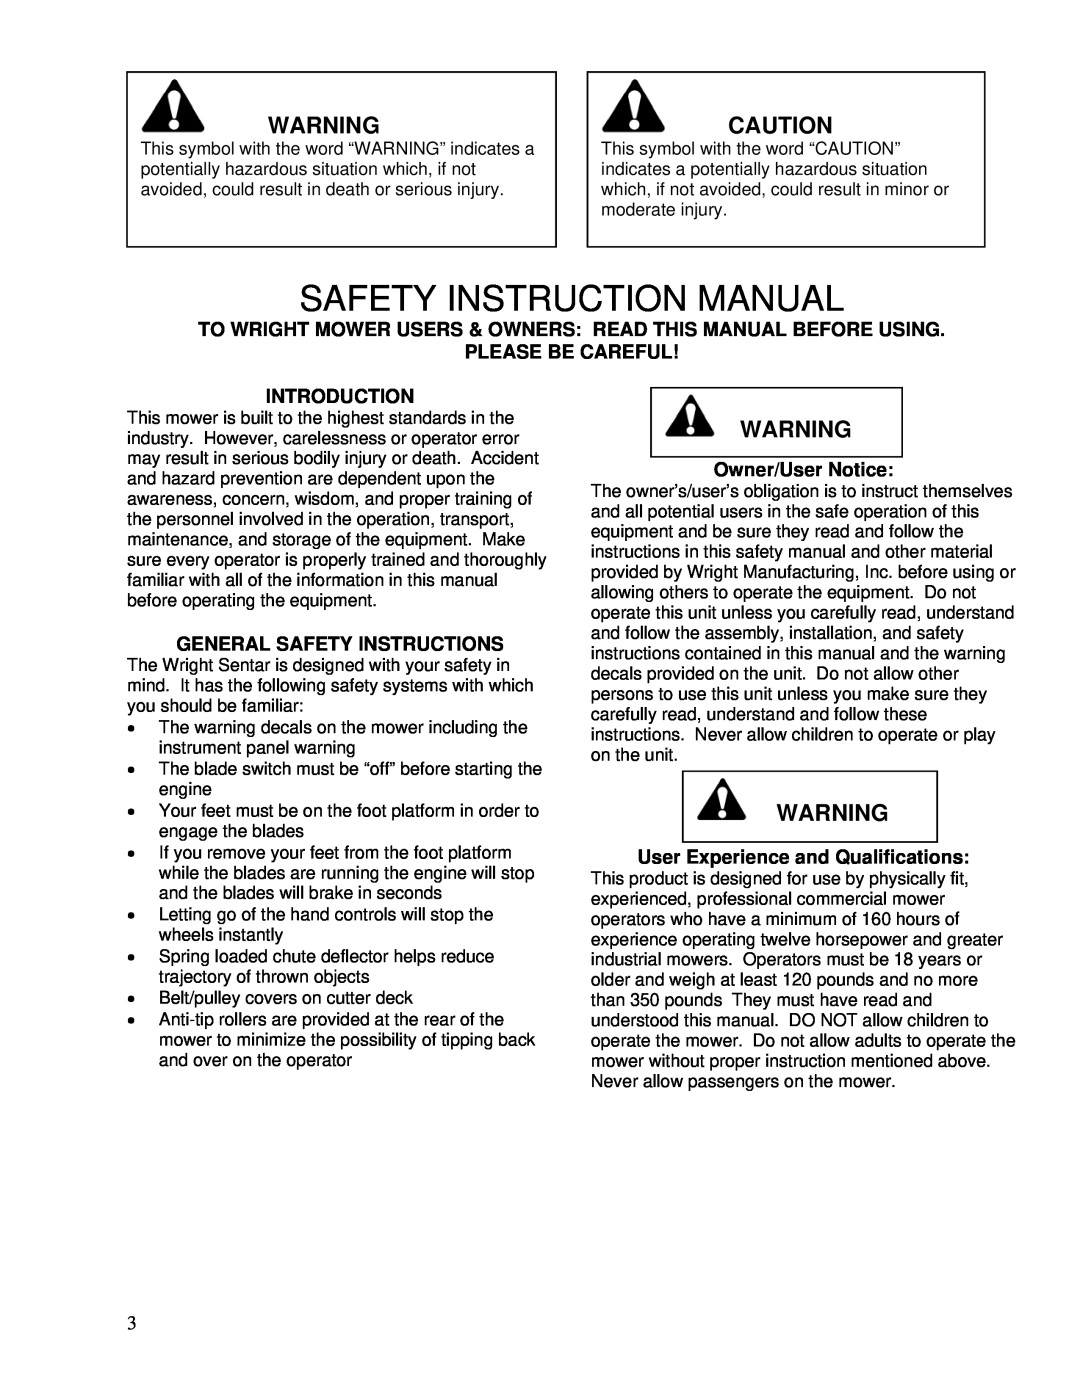 Wright Manufacturing 26980 owner manual Please Be Careful, Introduction, General Safety Instructions, Owner/User Notice 